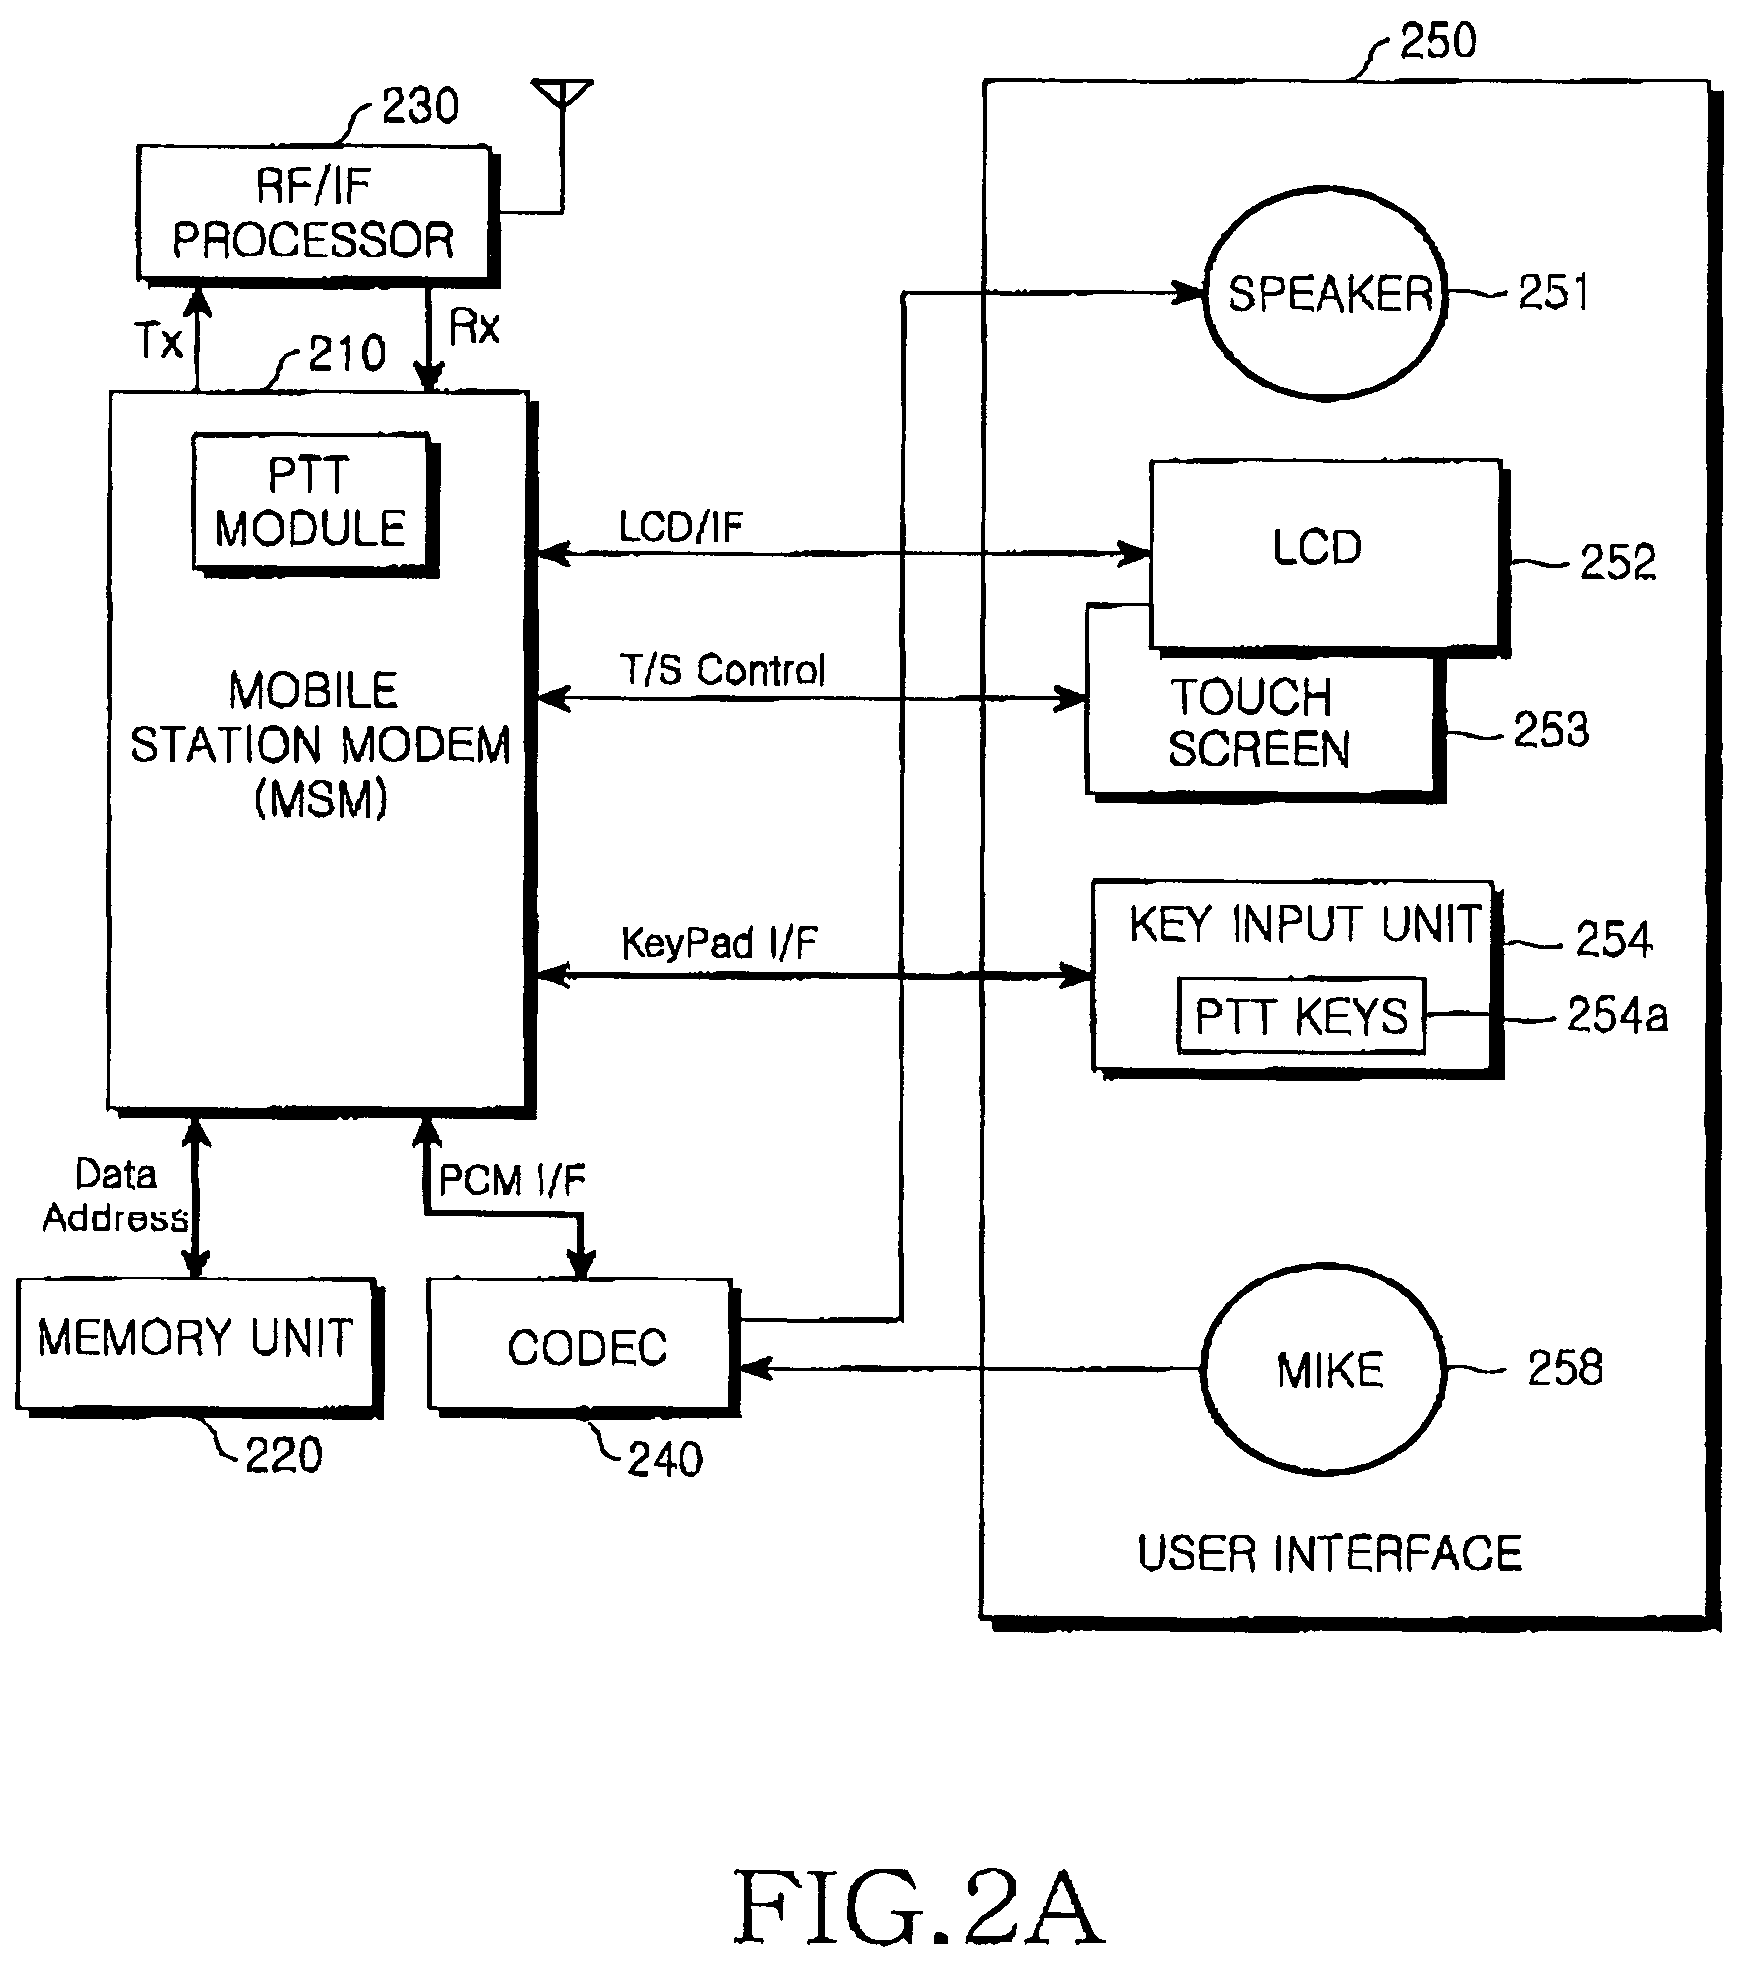 Method of communicating using a push to talk scheme in a mobile communication system